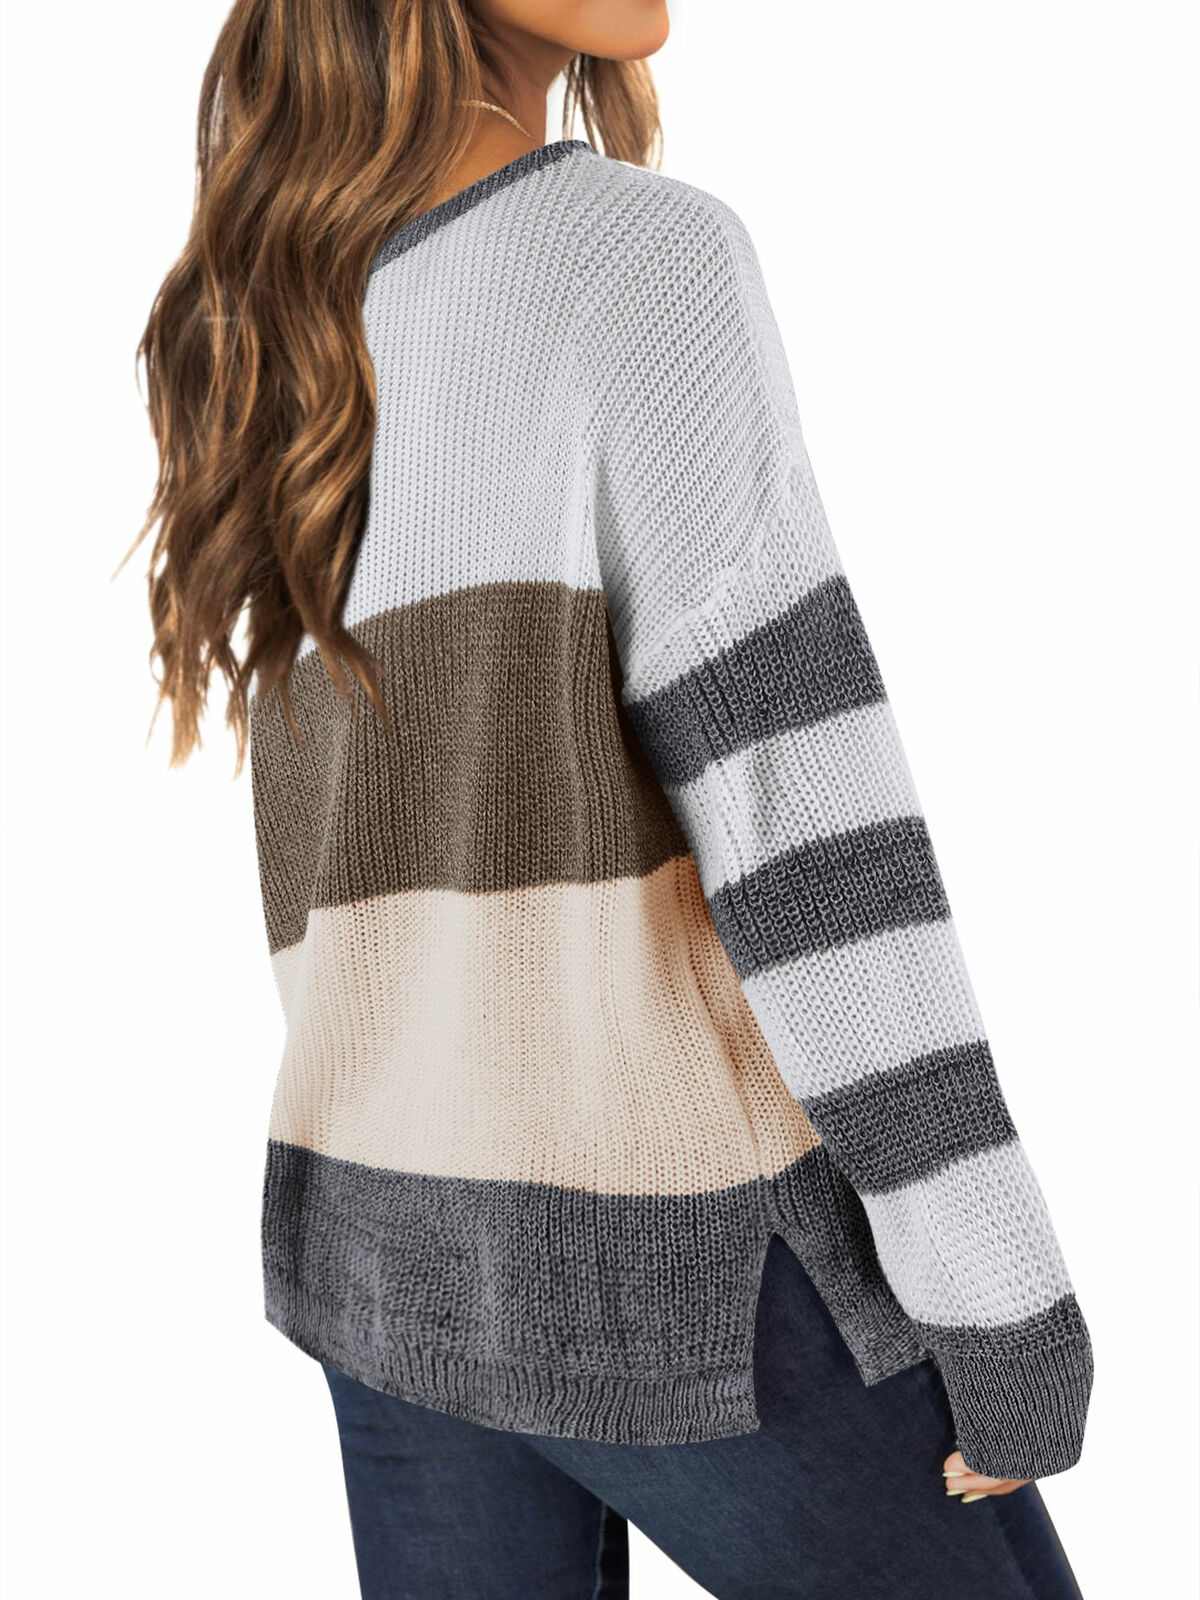 HUBERY Women Crew Neck Long Sleeve Stripes Color Block Knitted Sweater